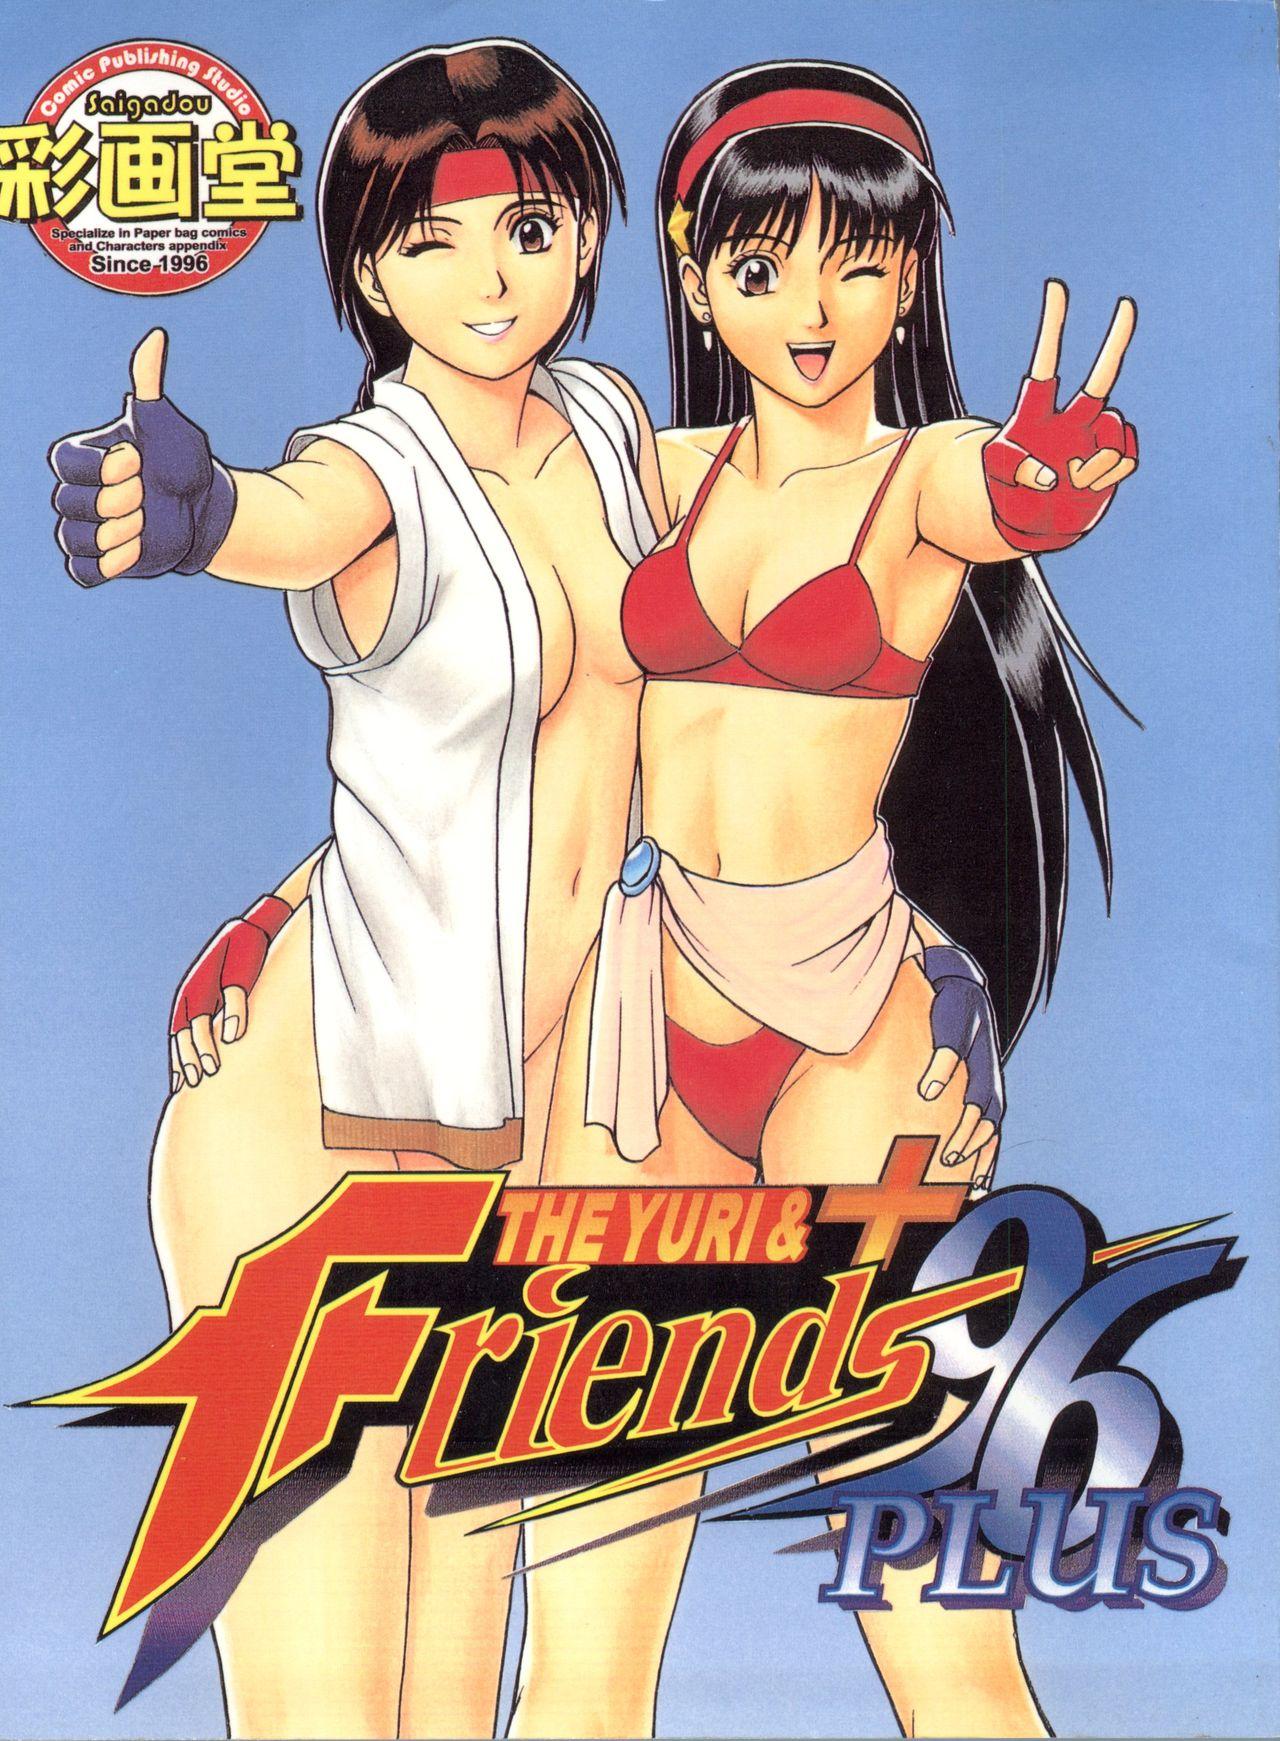 Swinger The Yuri&Friends '96 Plus - King of fighters Teenporno - Picture 1